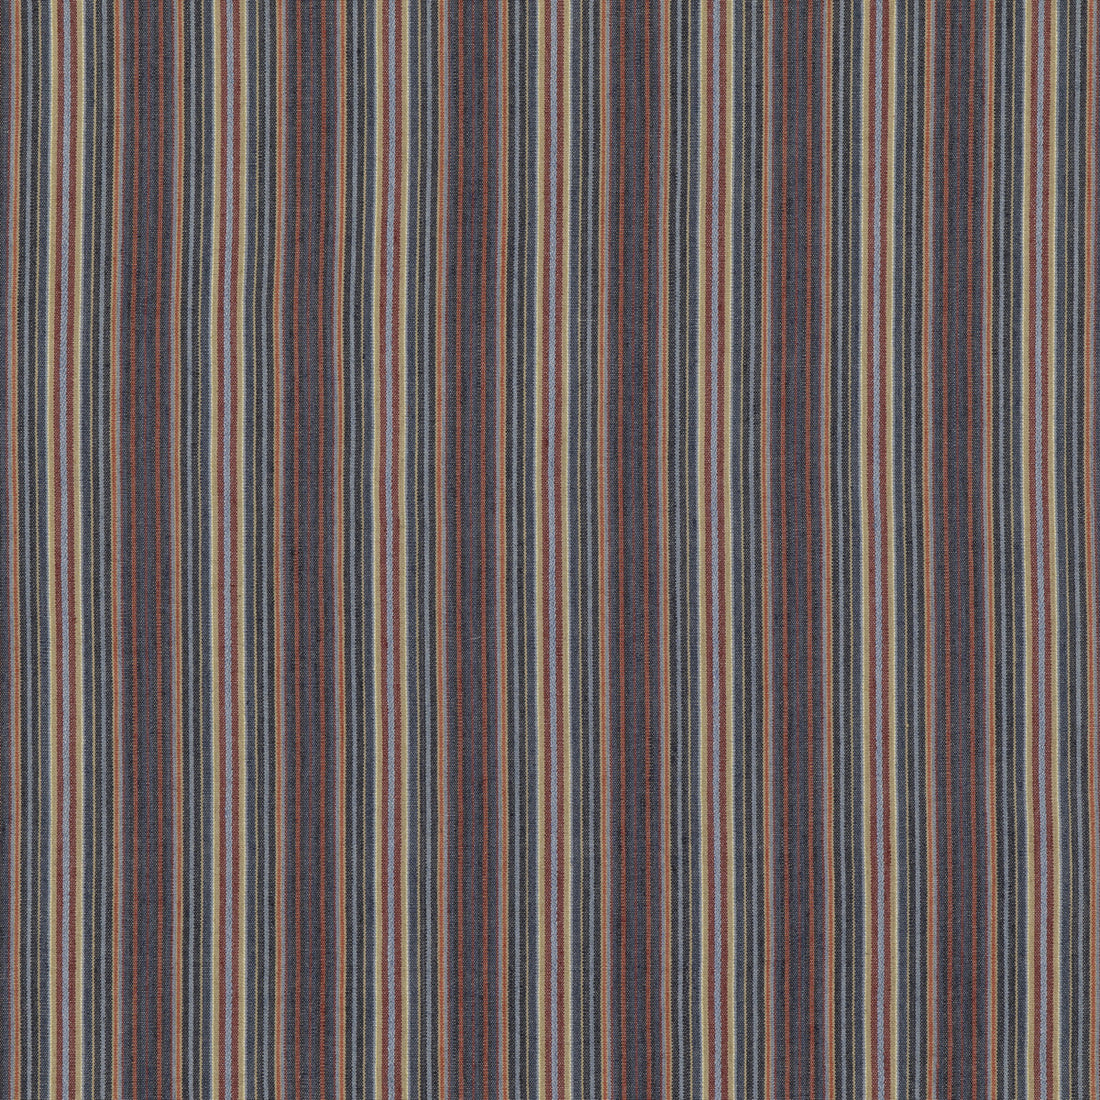 Falconer Stripe fabric in indigo/red color - pattern FD789.G103.0 - by Mulberry in the Mulberry Stripes II collection